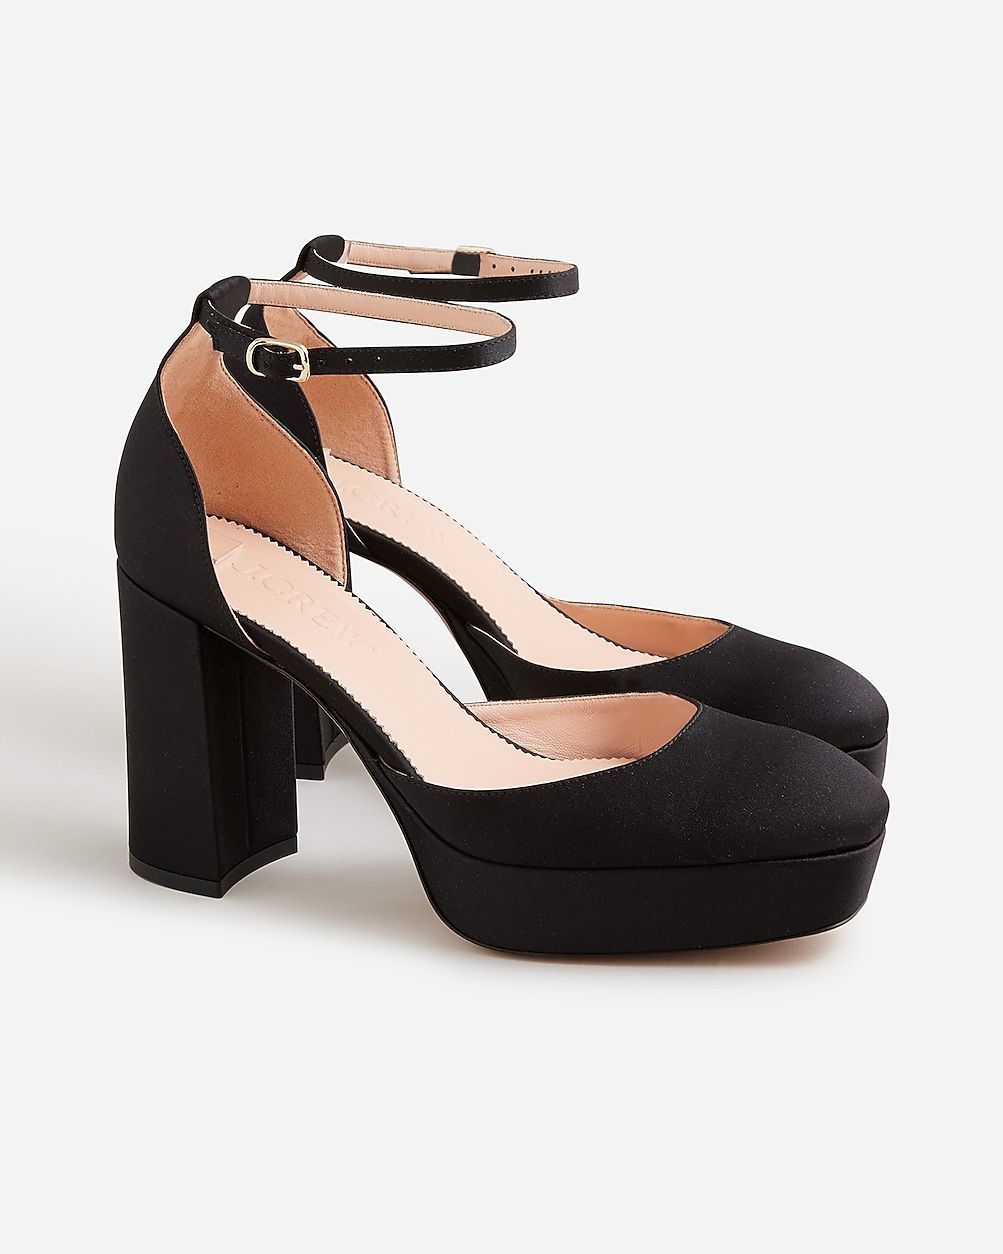 Collection Maisie made-in-Italy platform heels | J.Crew US